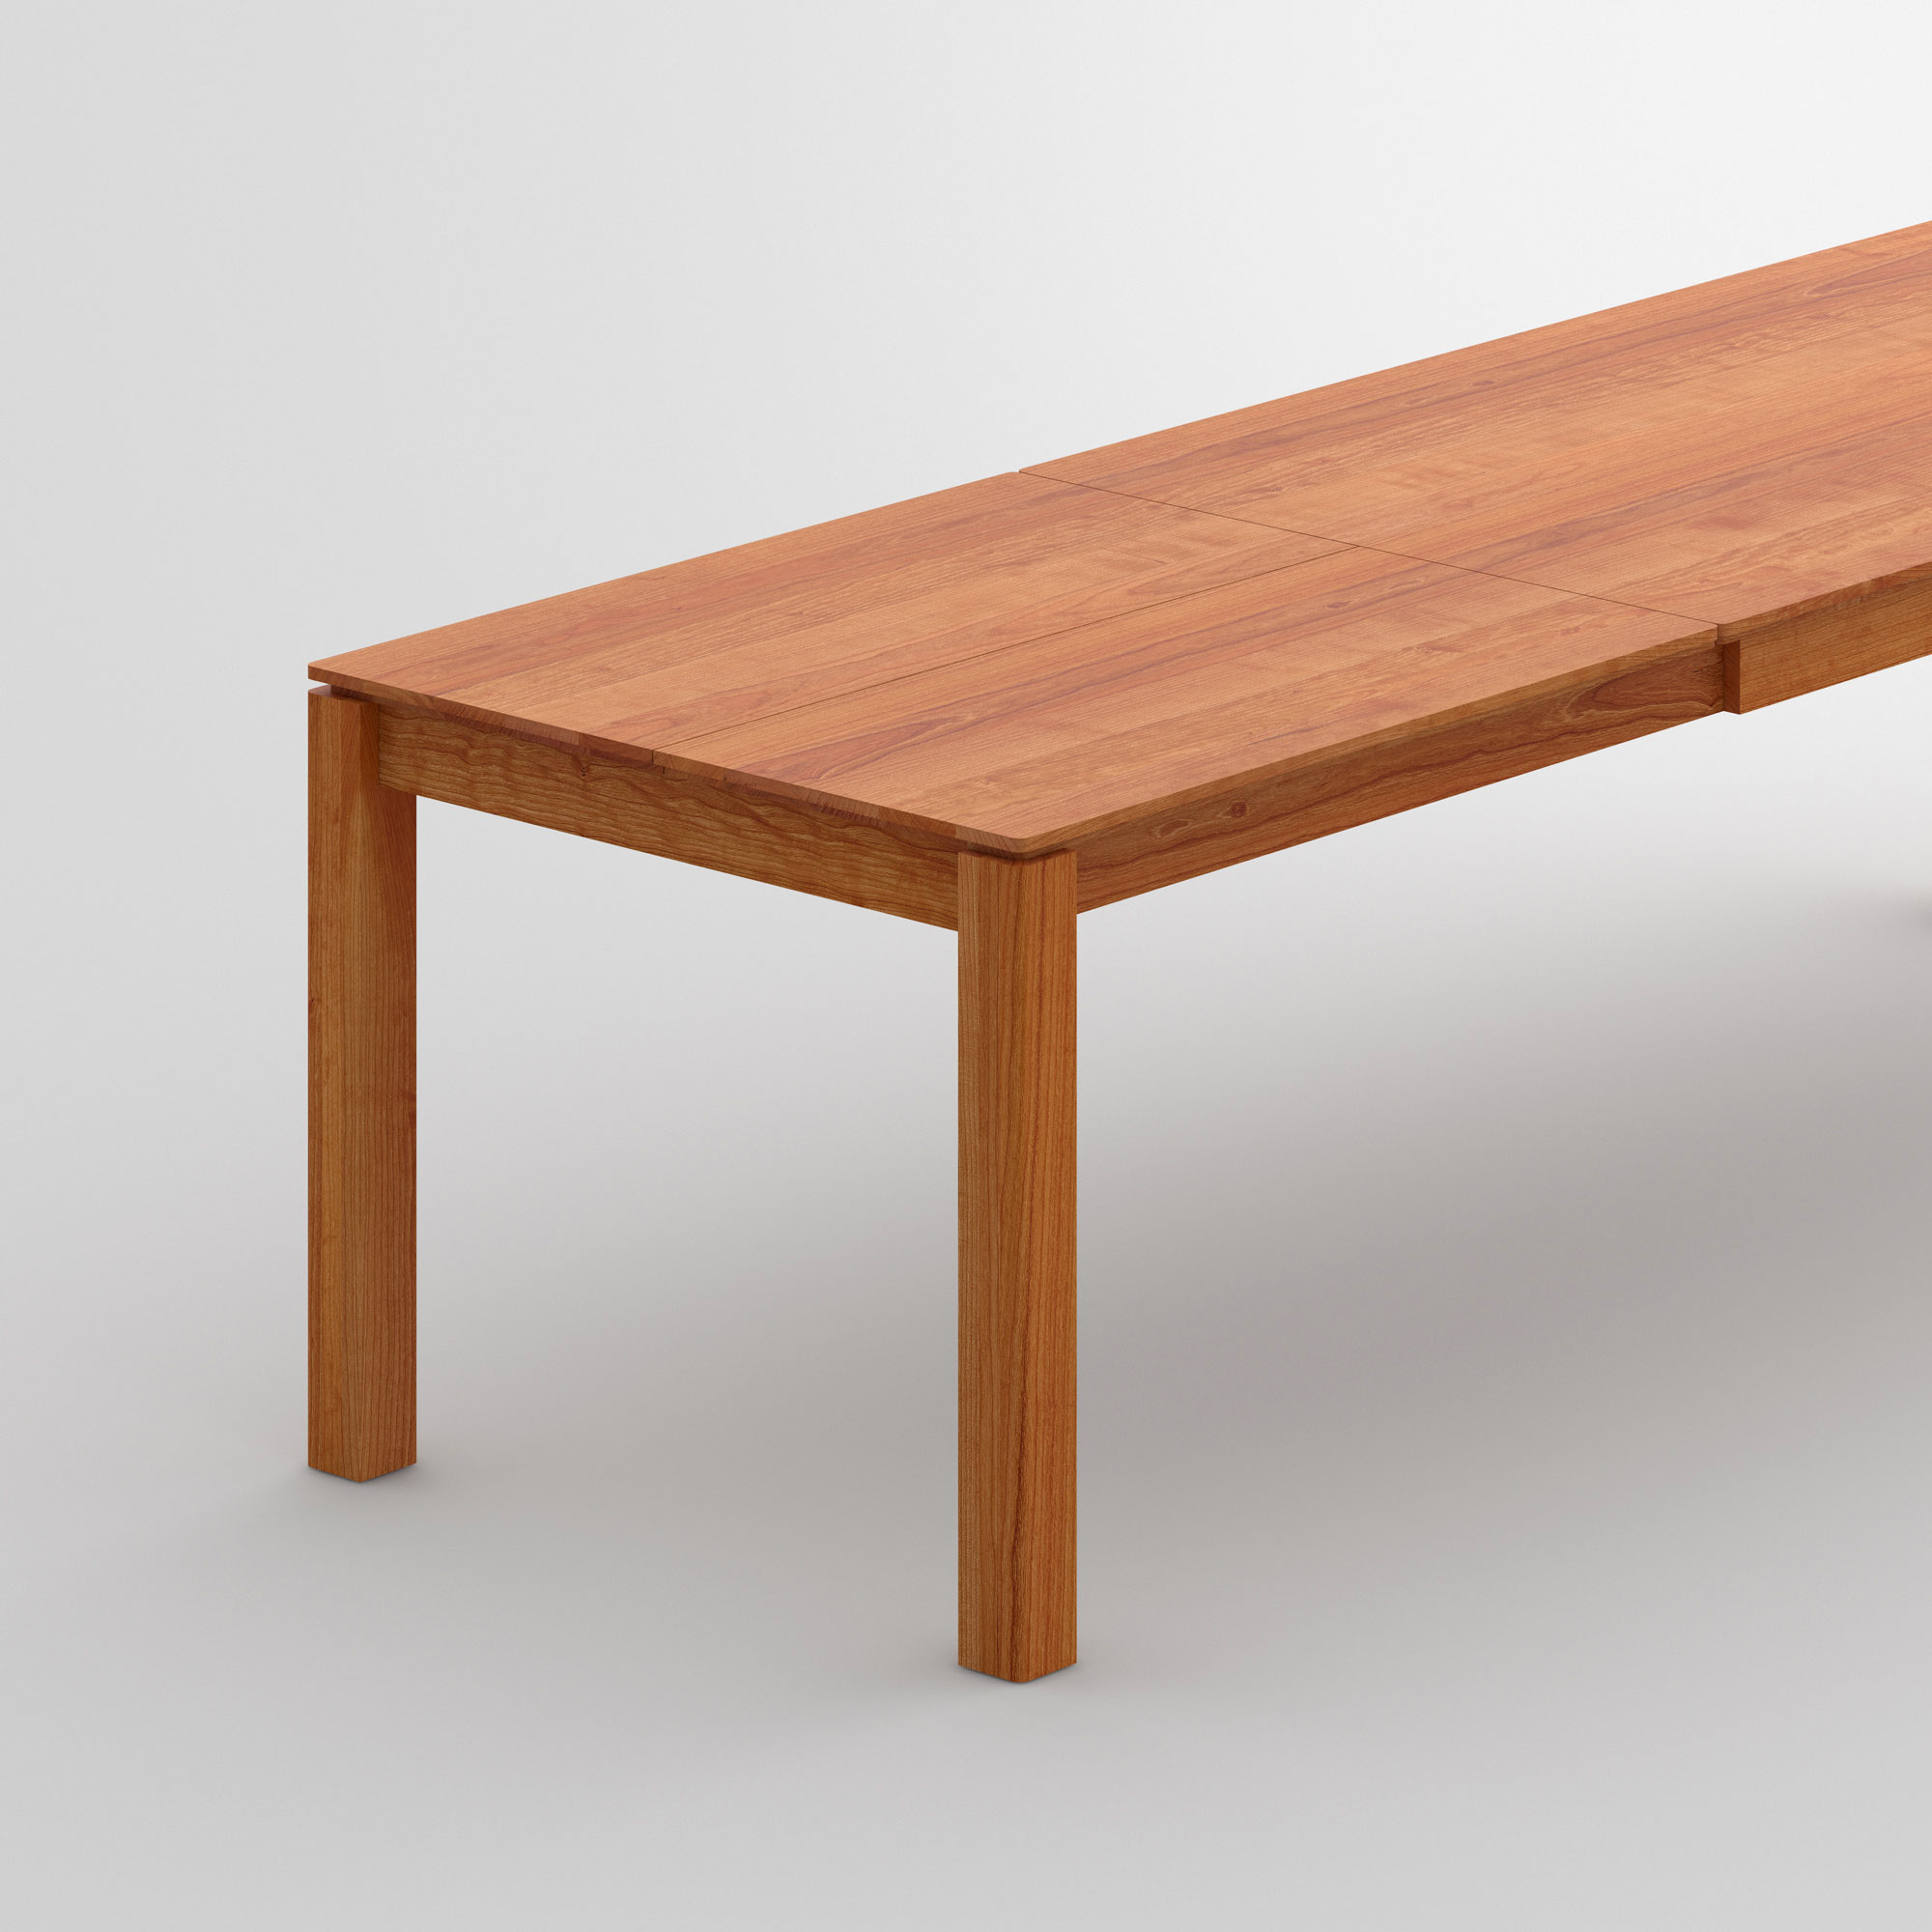 Dining Table Butterfly-System VERSO BUTTERFLY cam2 custom made in solid wood by vitamin design